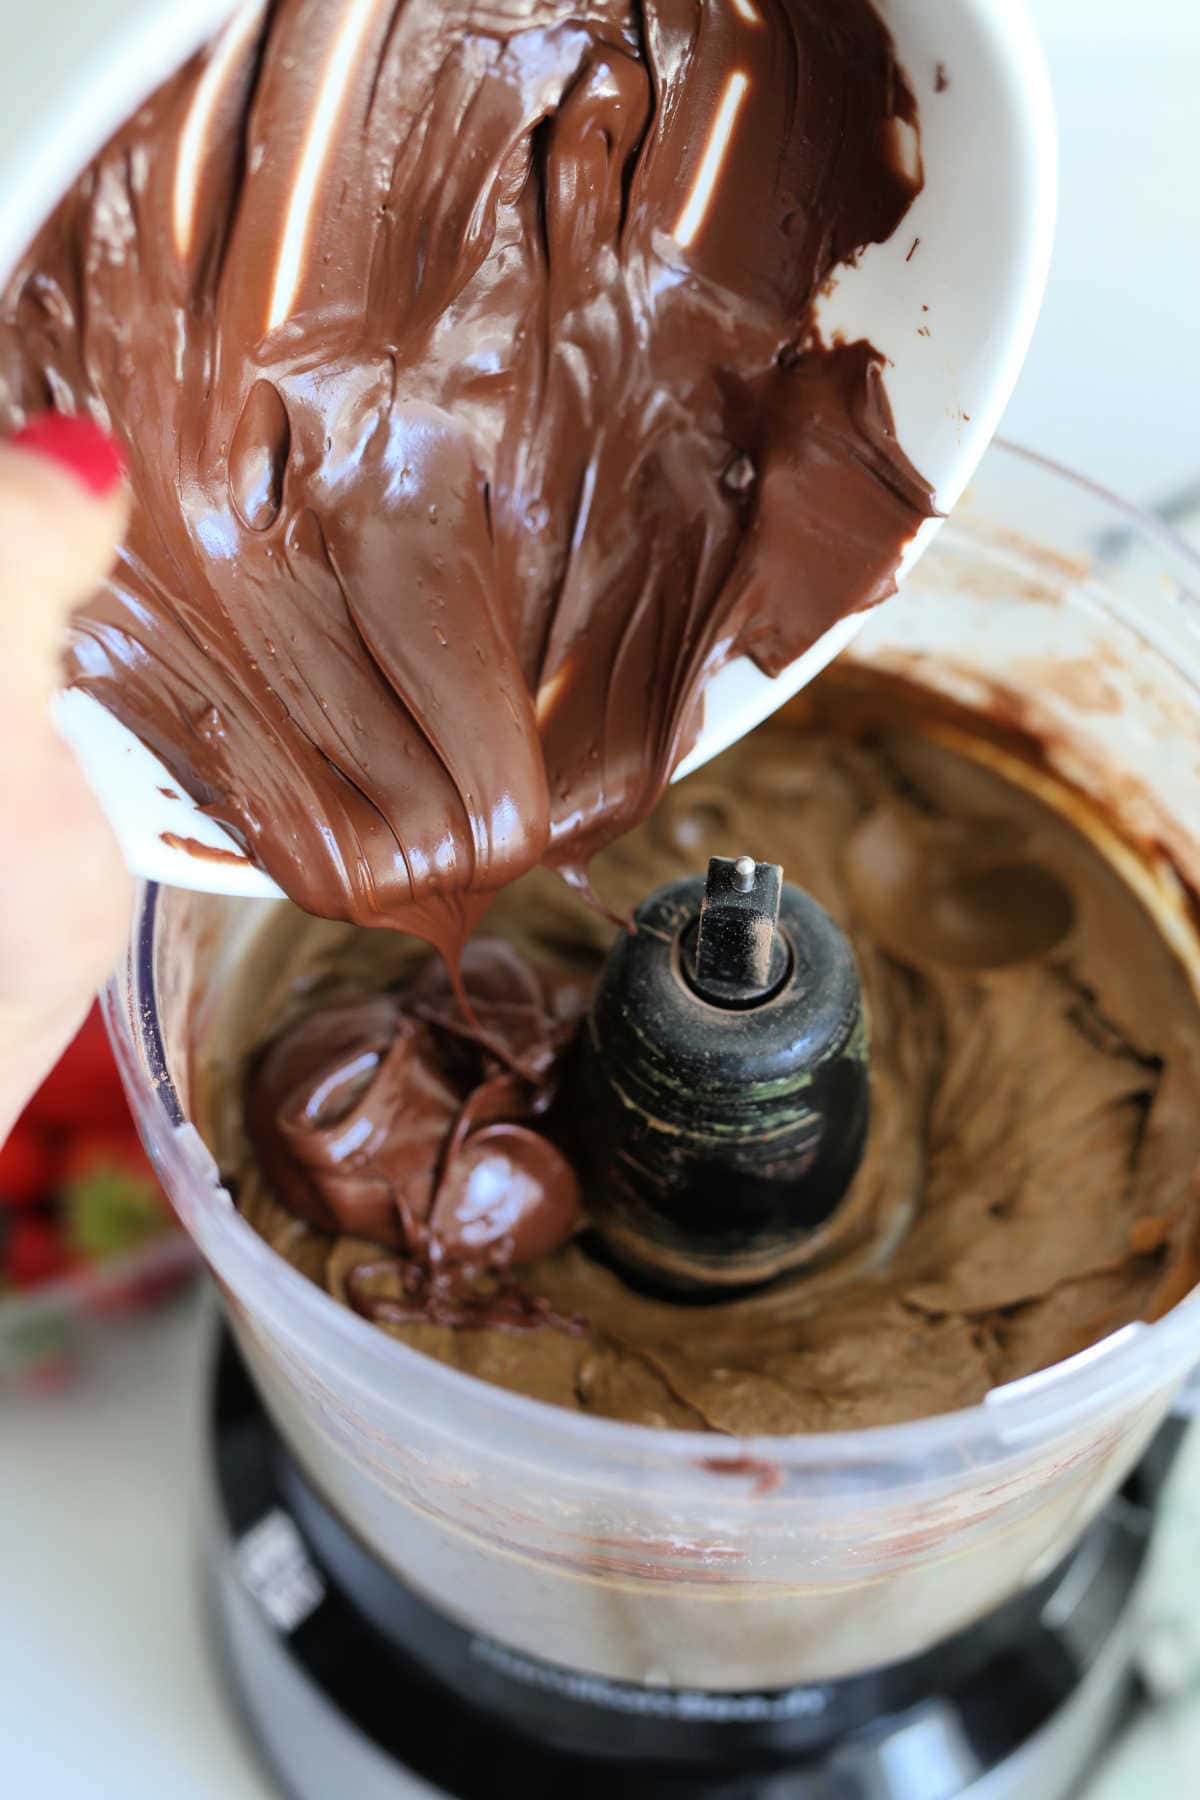 melted chocolate pouring into pudding in a food processor